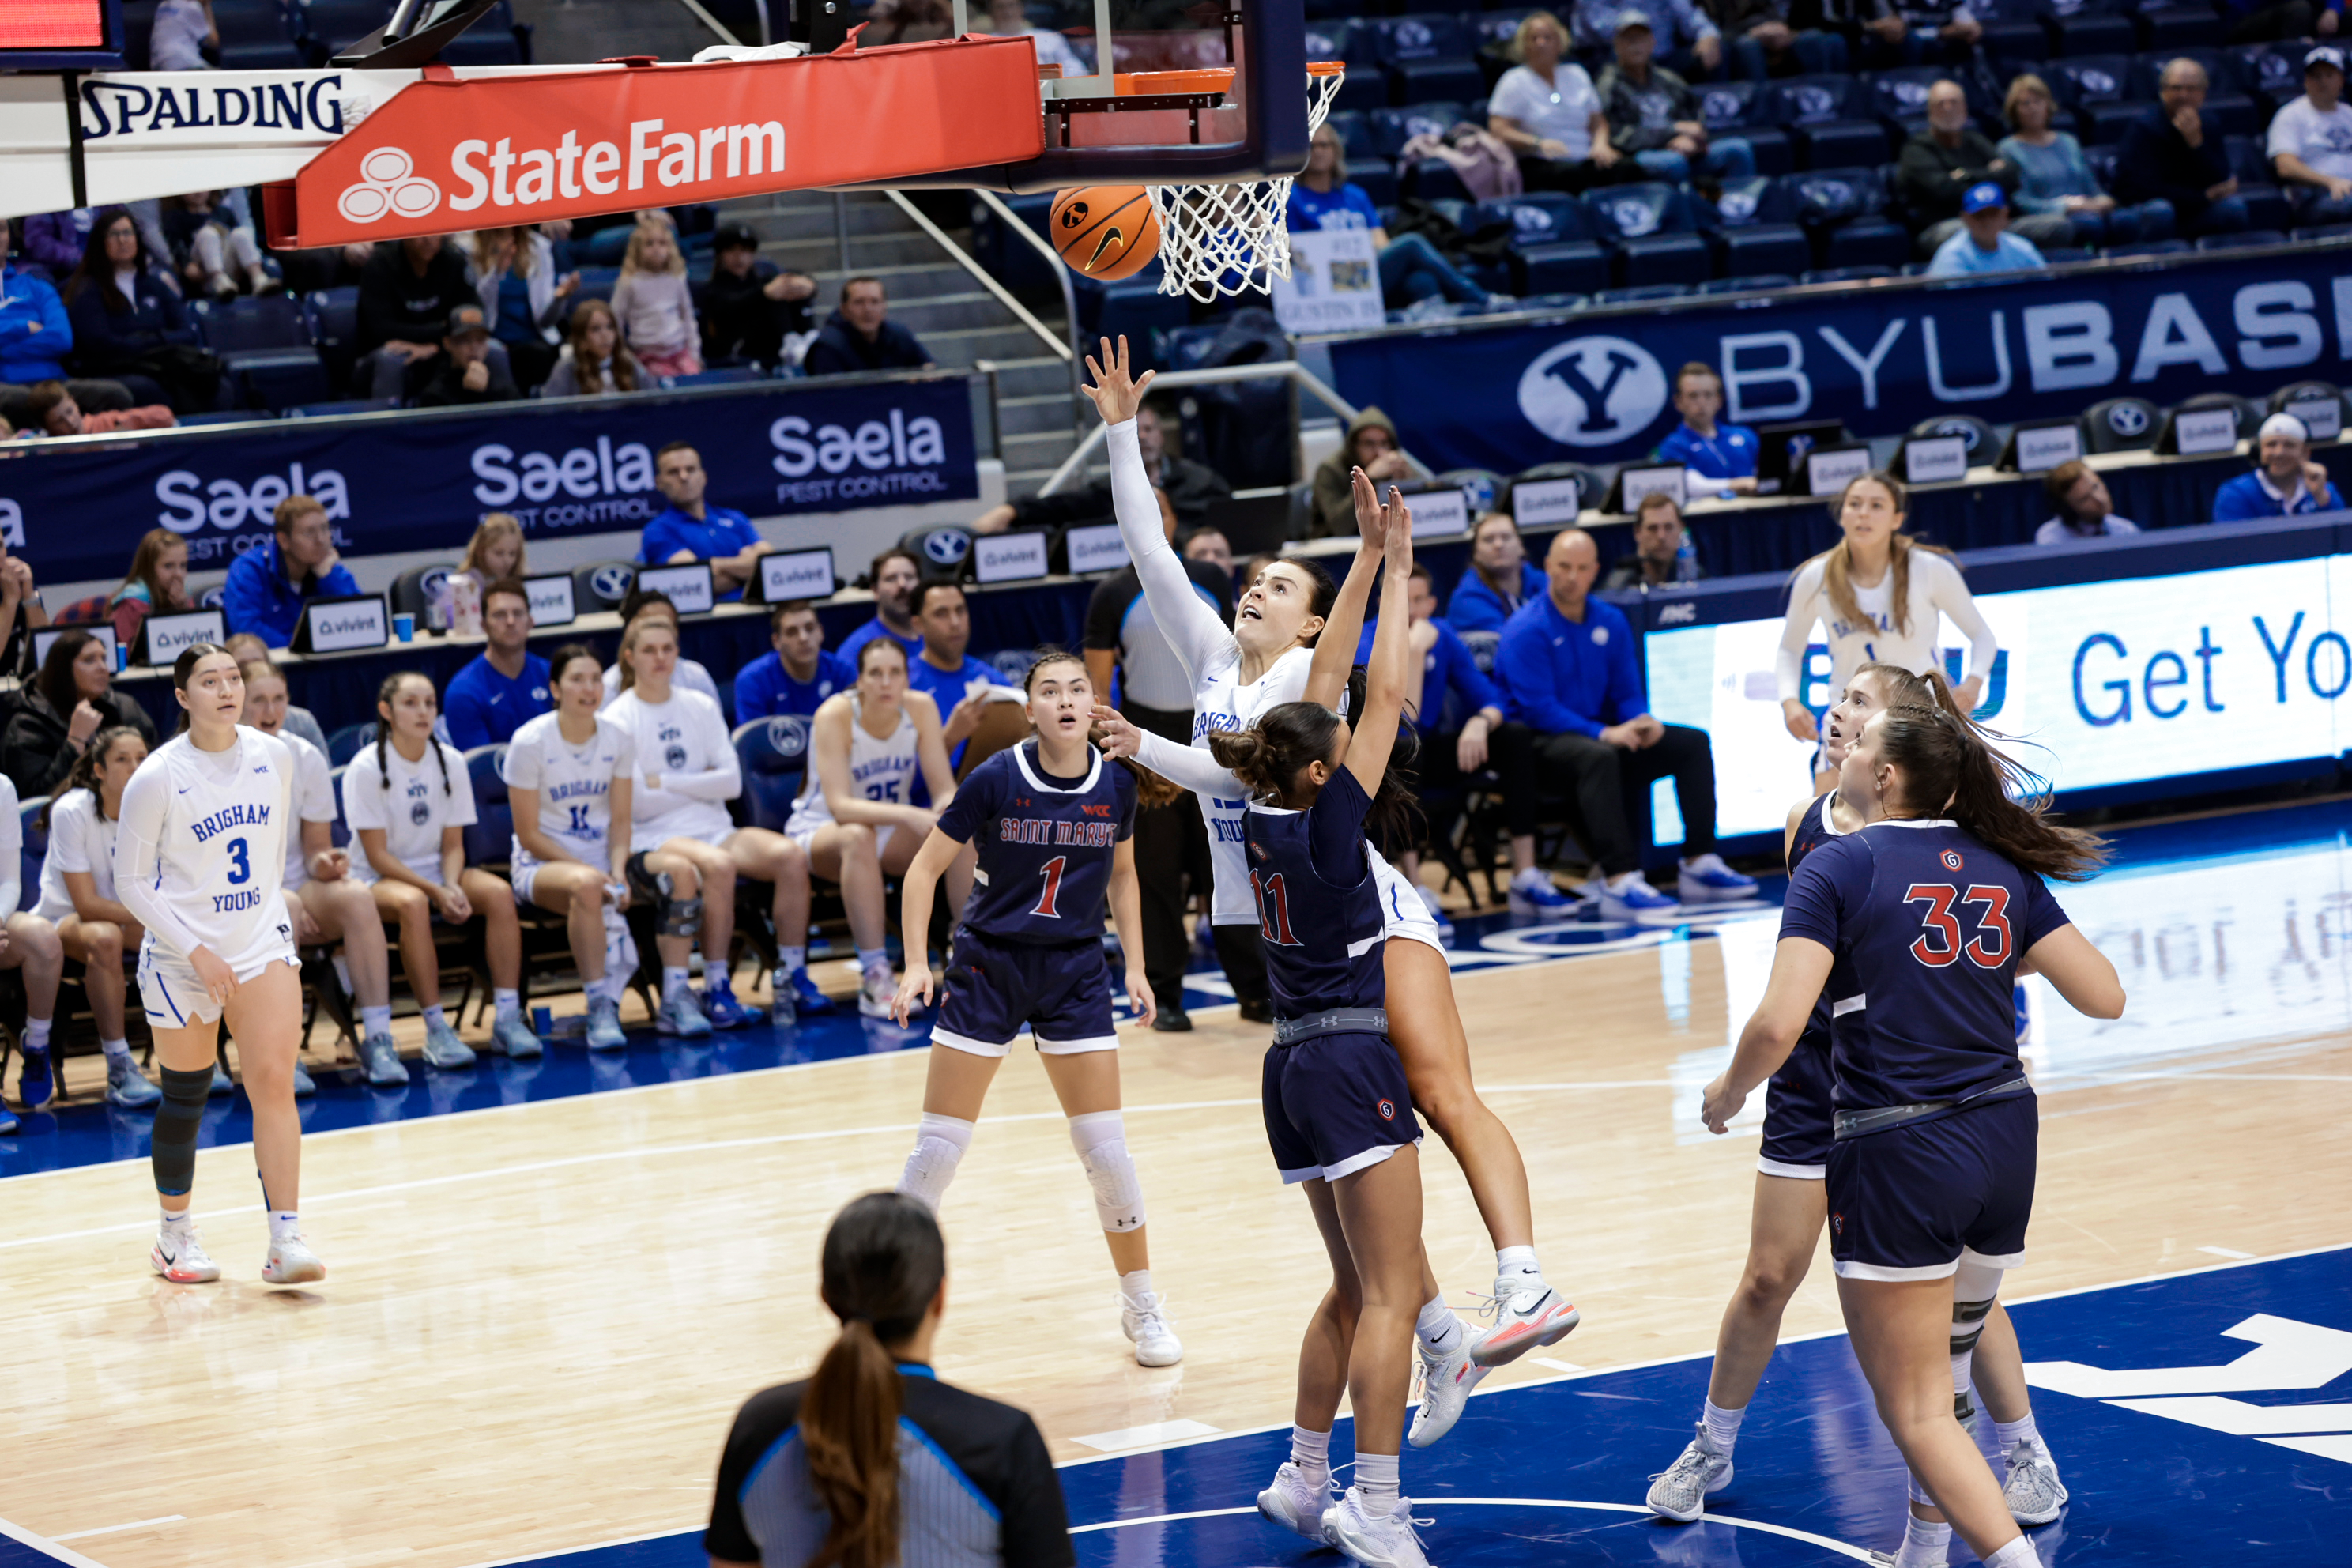 Lauren Gustin scores over a Saint Mary's defender in a game at the Marriott Center.